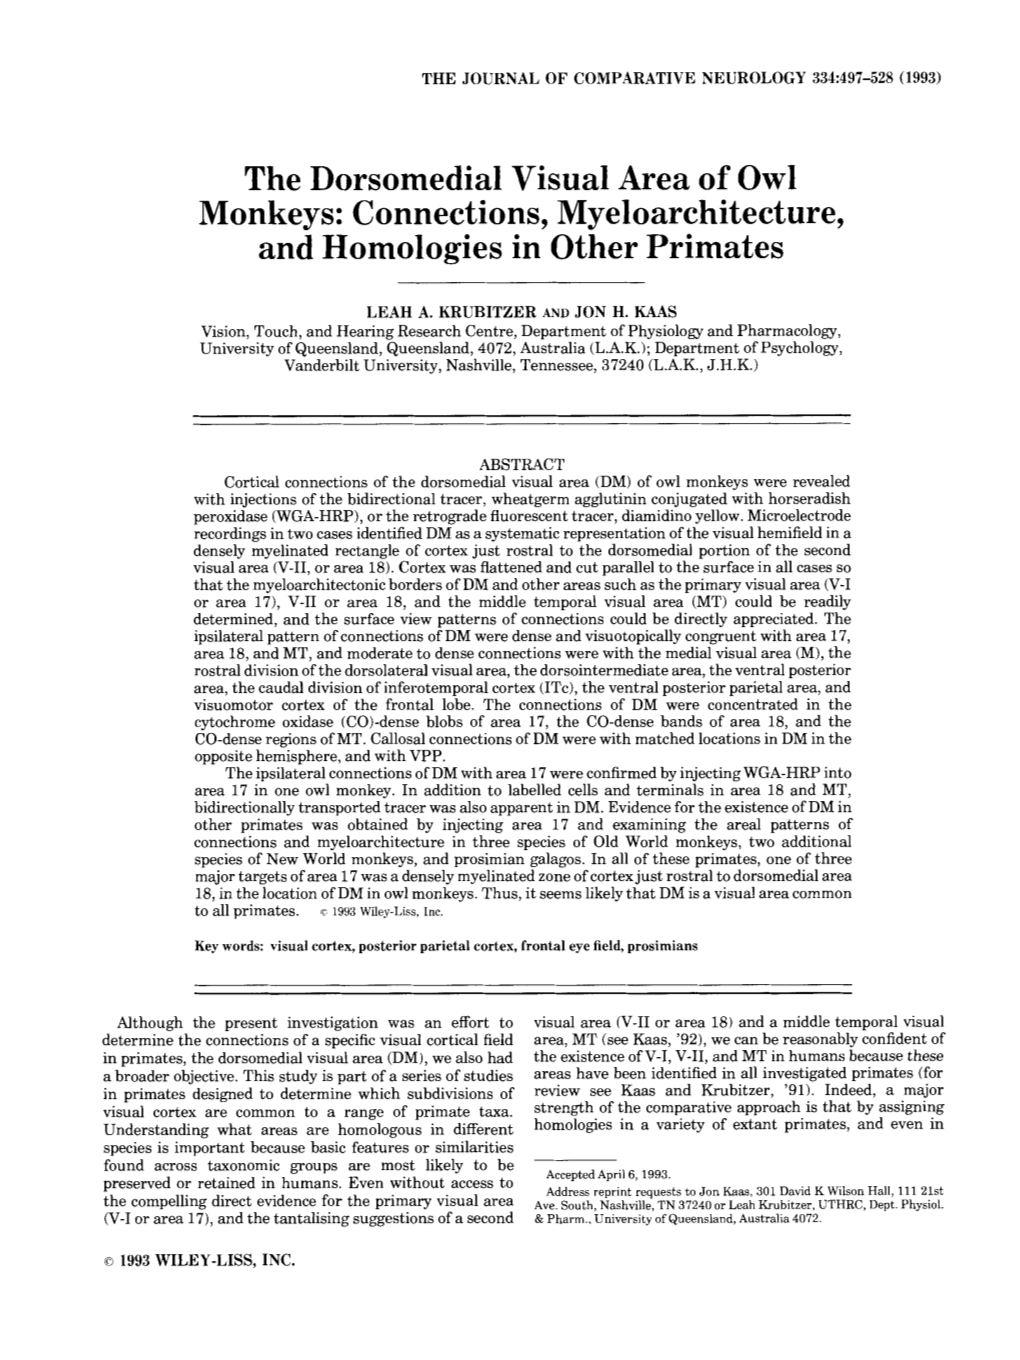 The Dorsomedial Visual Area of Owl Monkeys: Connections, Myeloarchitecture, and Homologies in Other Primates